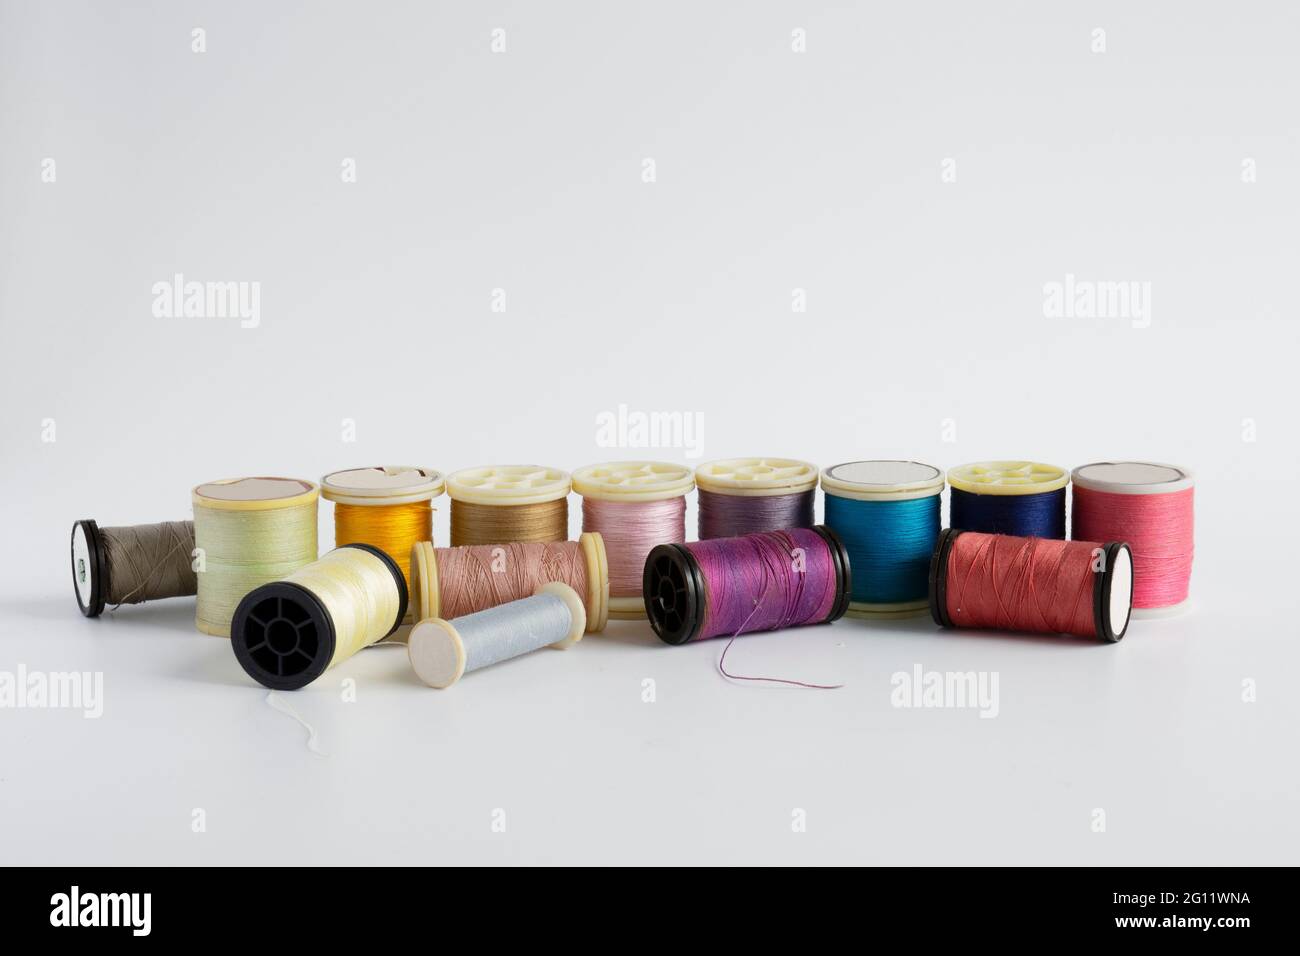 Spools of thread on a white background lined up in color Stock Photo